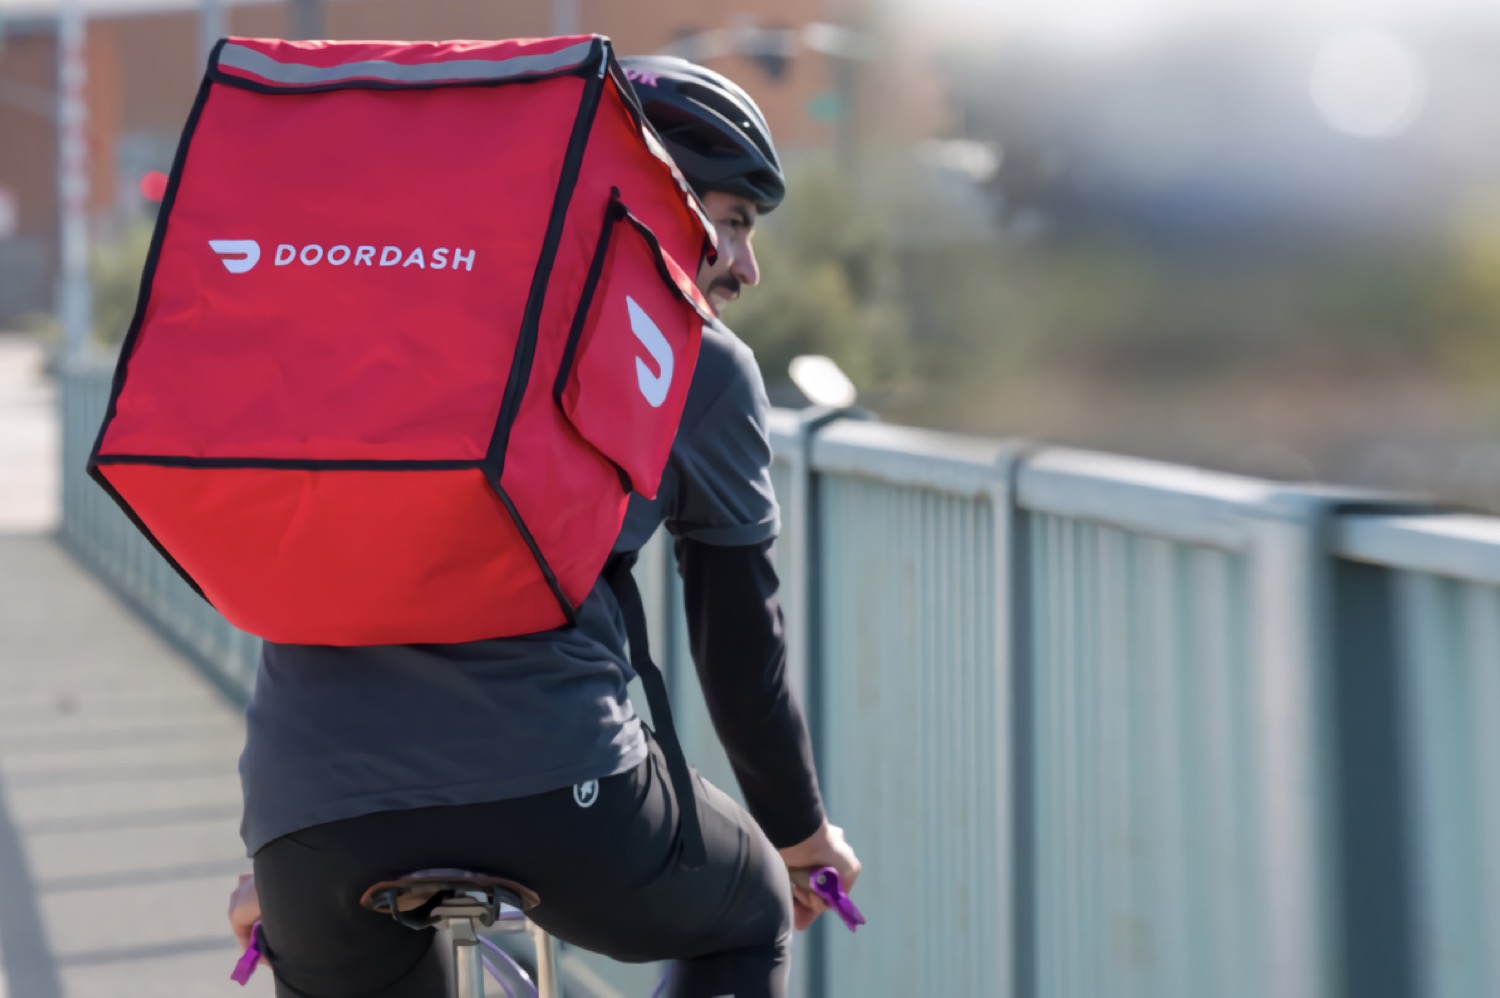 San Francisco DA sues DoorDash for classifying delivery workers as independent contractors